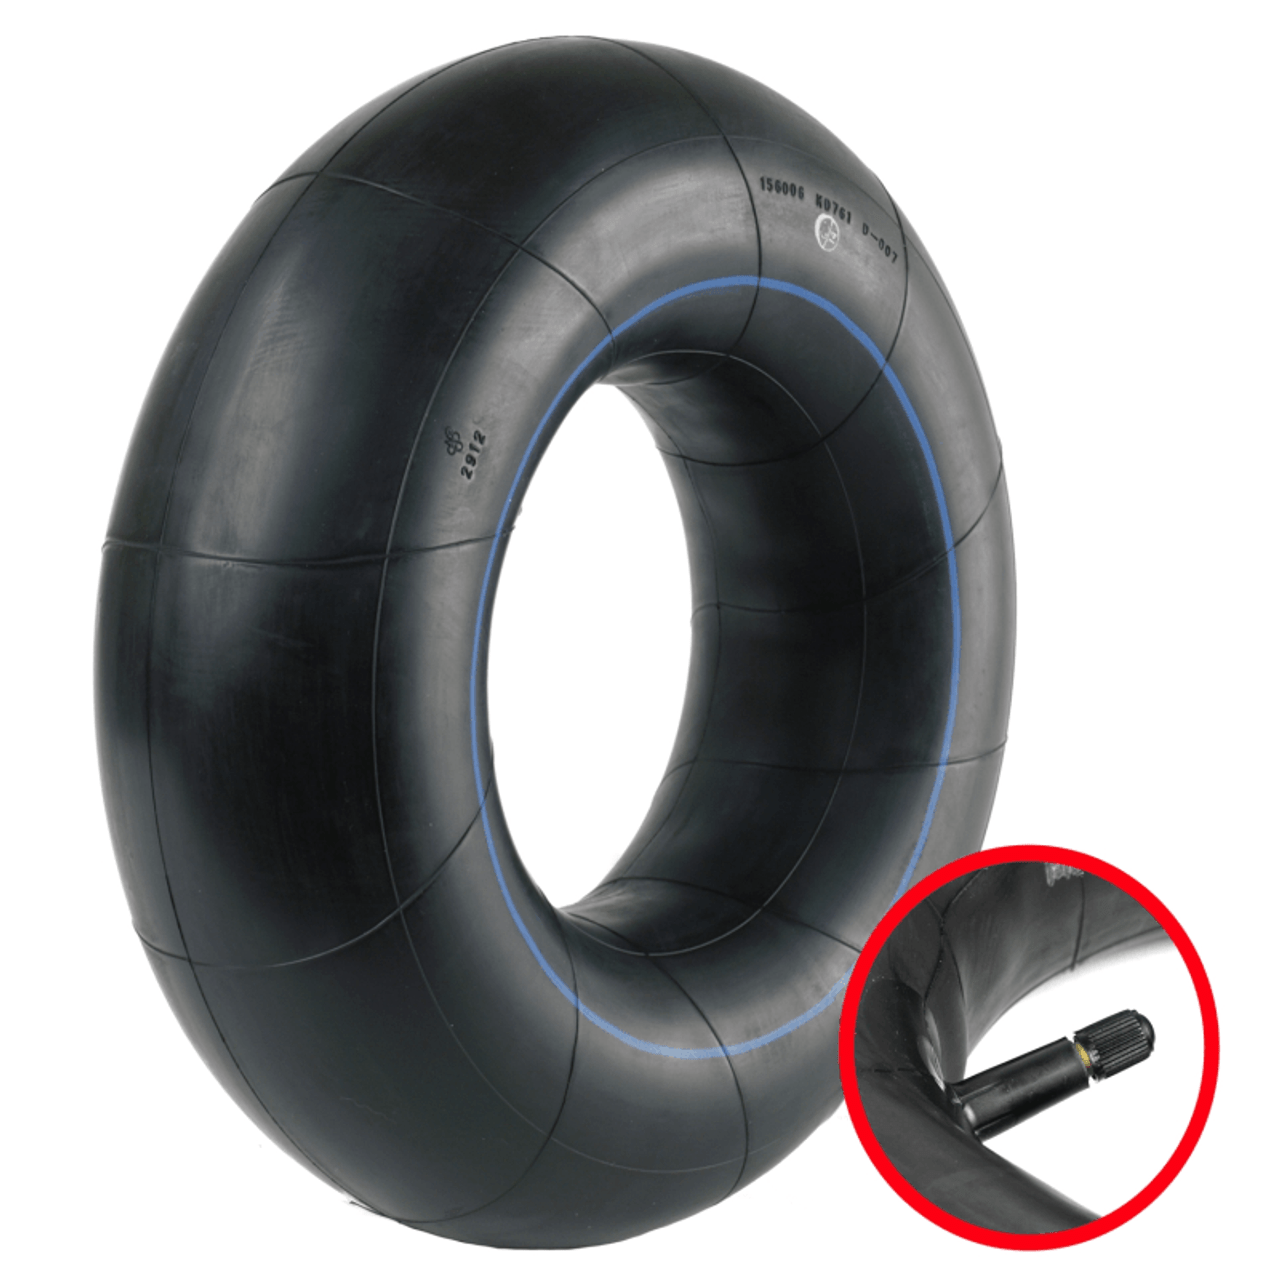 Premium replacement tire inner tube made with quality butyl rubber to repair your power equipment with confidence. This tube fits select Ariens models.